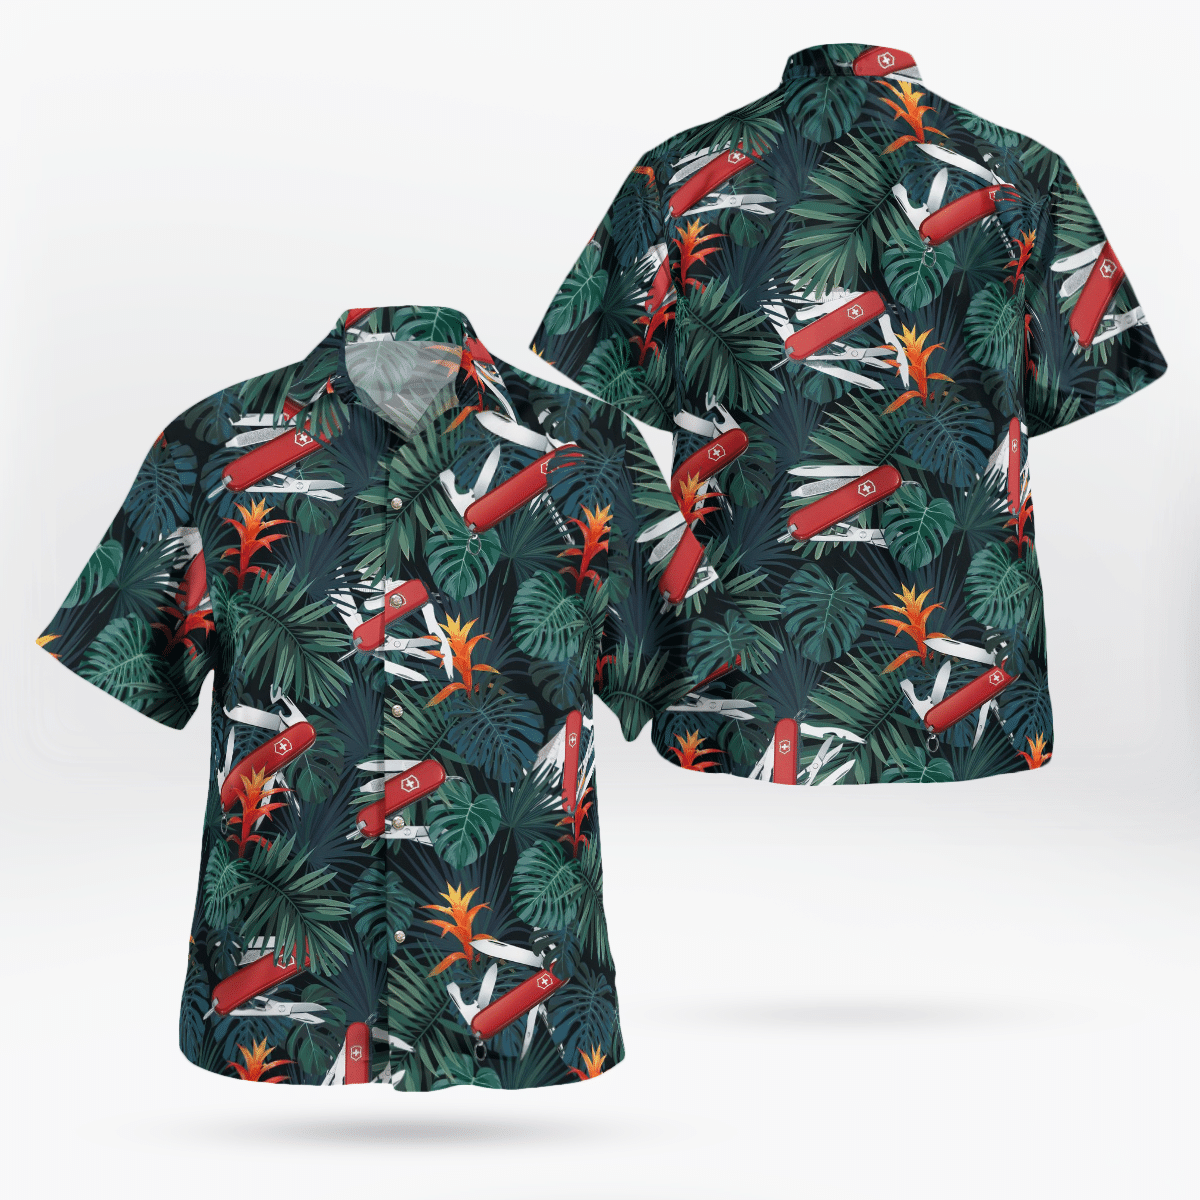 If you are in need of a new summertime look, pick up this Hawaiian shirt 253